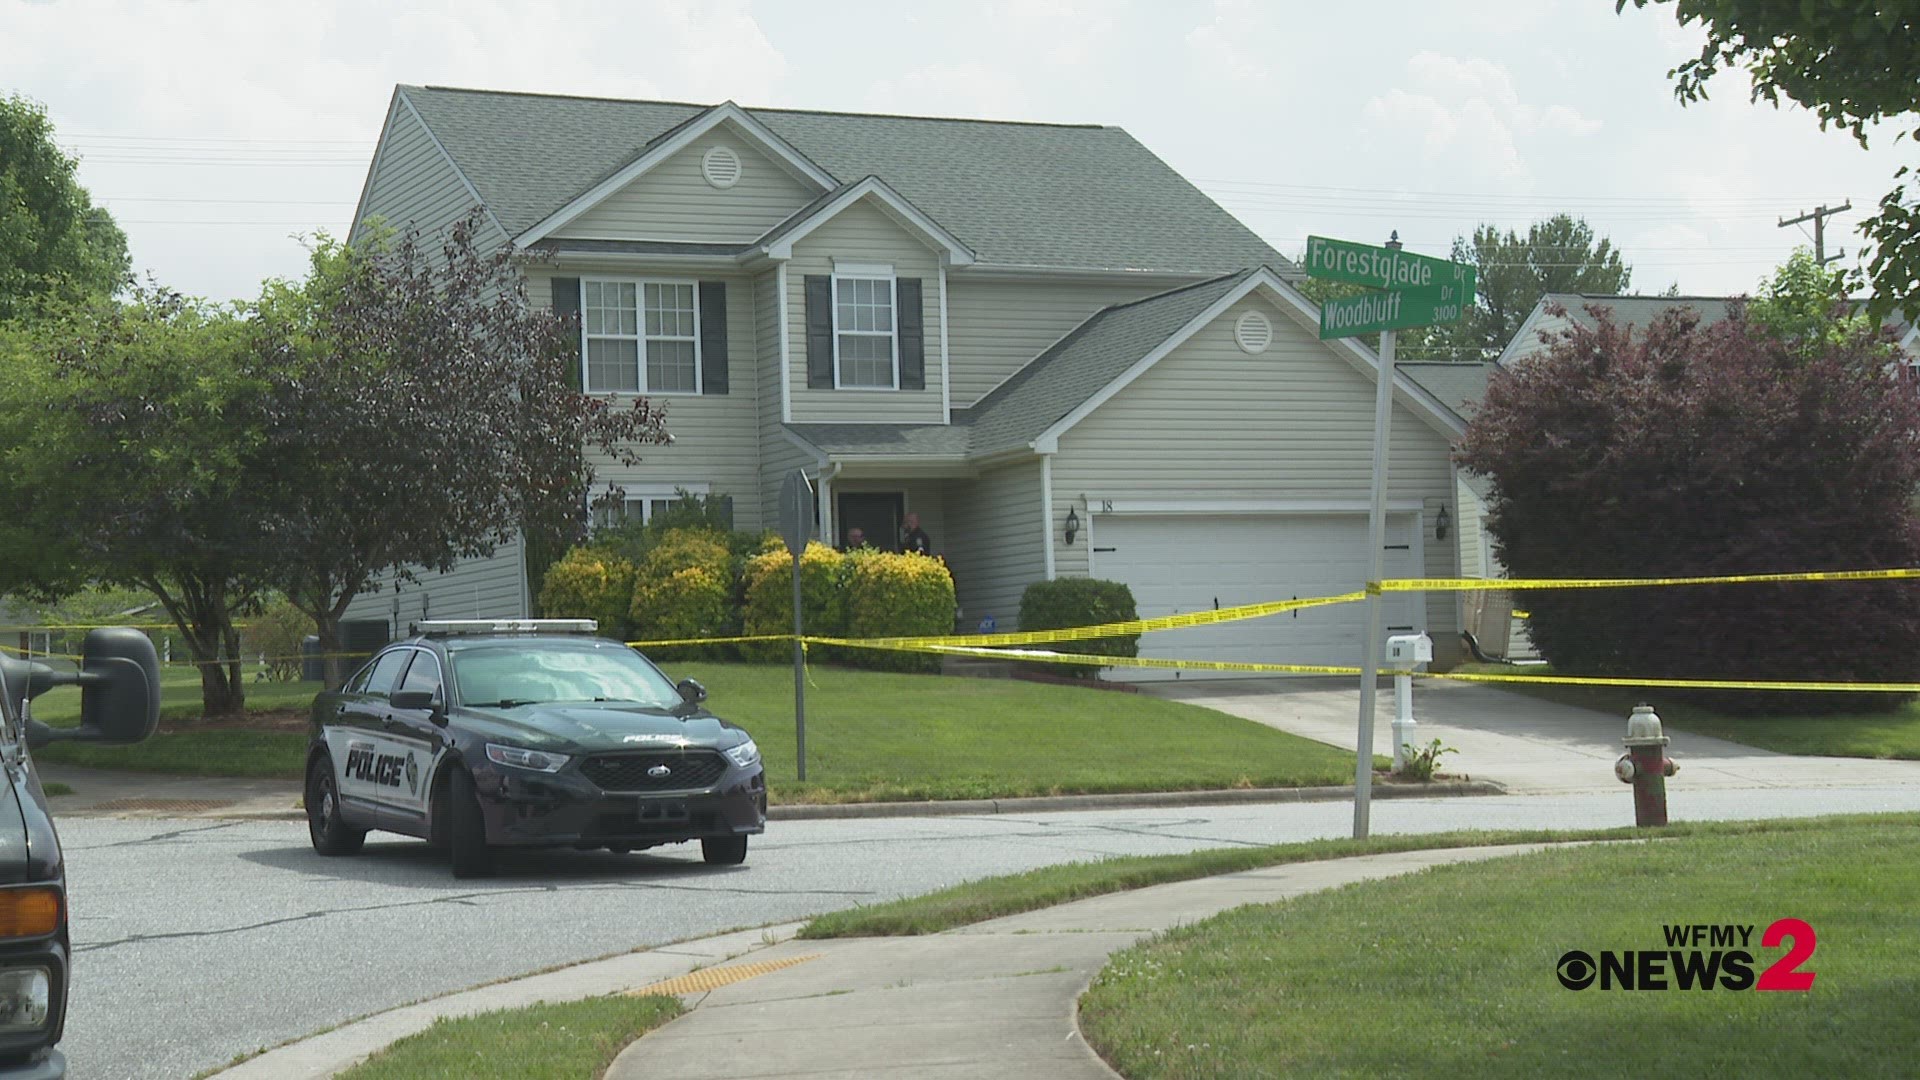 Greensboro police said they arrived at Forestglade Drive and found 33-year-old Kristen Coe Valdez suffering from injuries related to an assault.